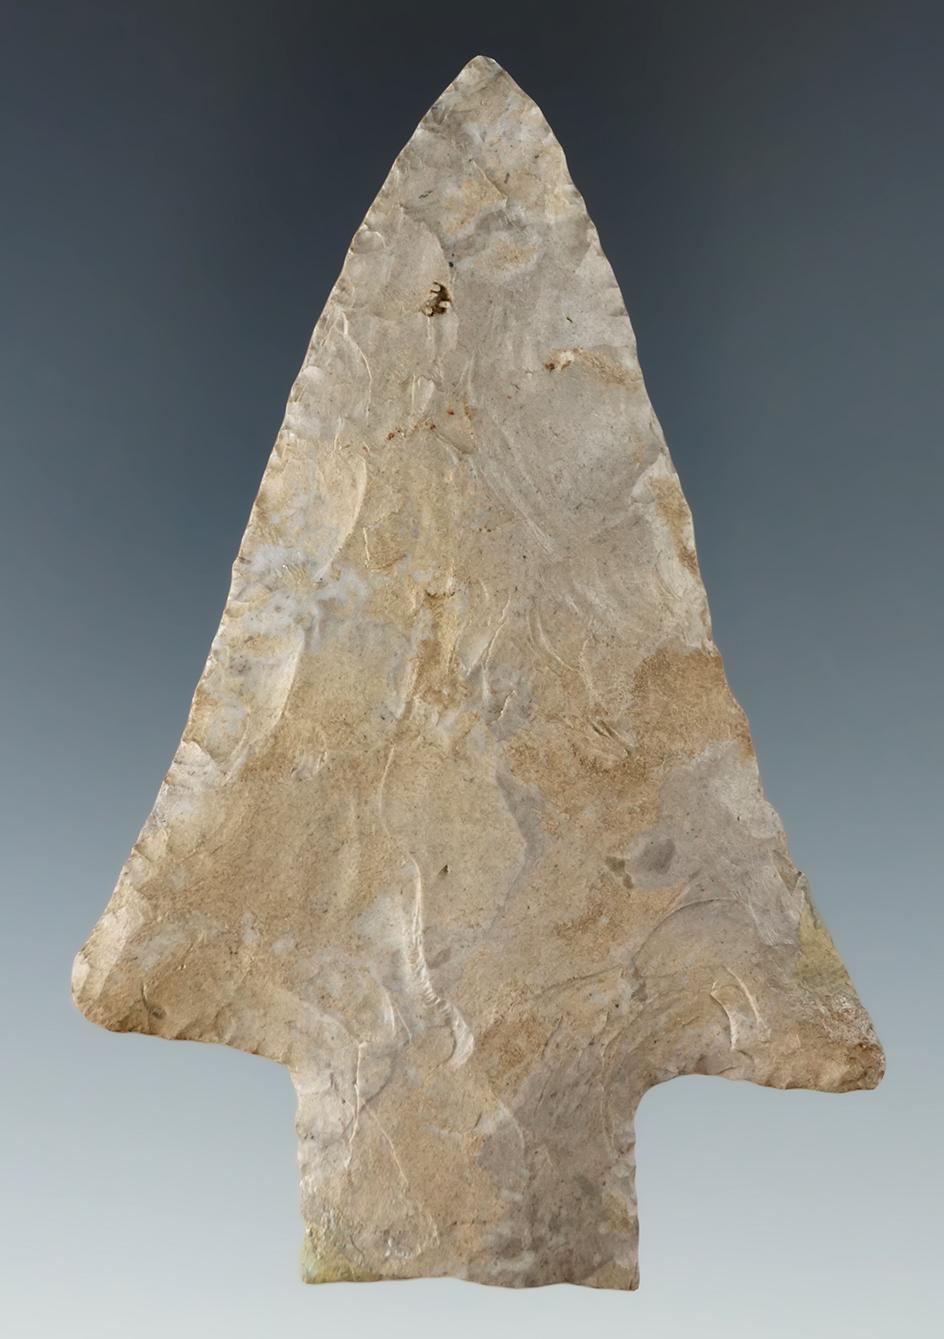 3 7/16" Genesee- Onondaga Flint found in Ontario Canada. Two small areas of restoration.